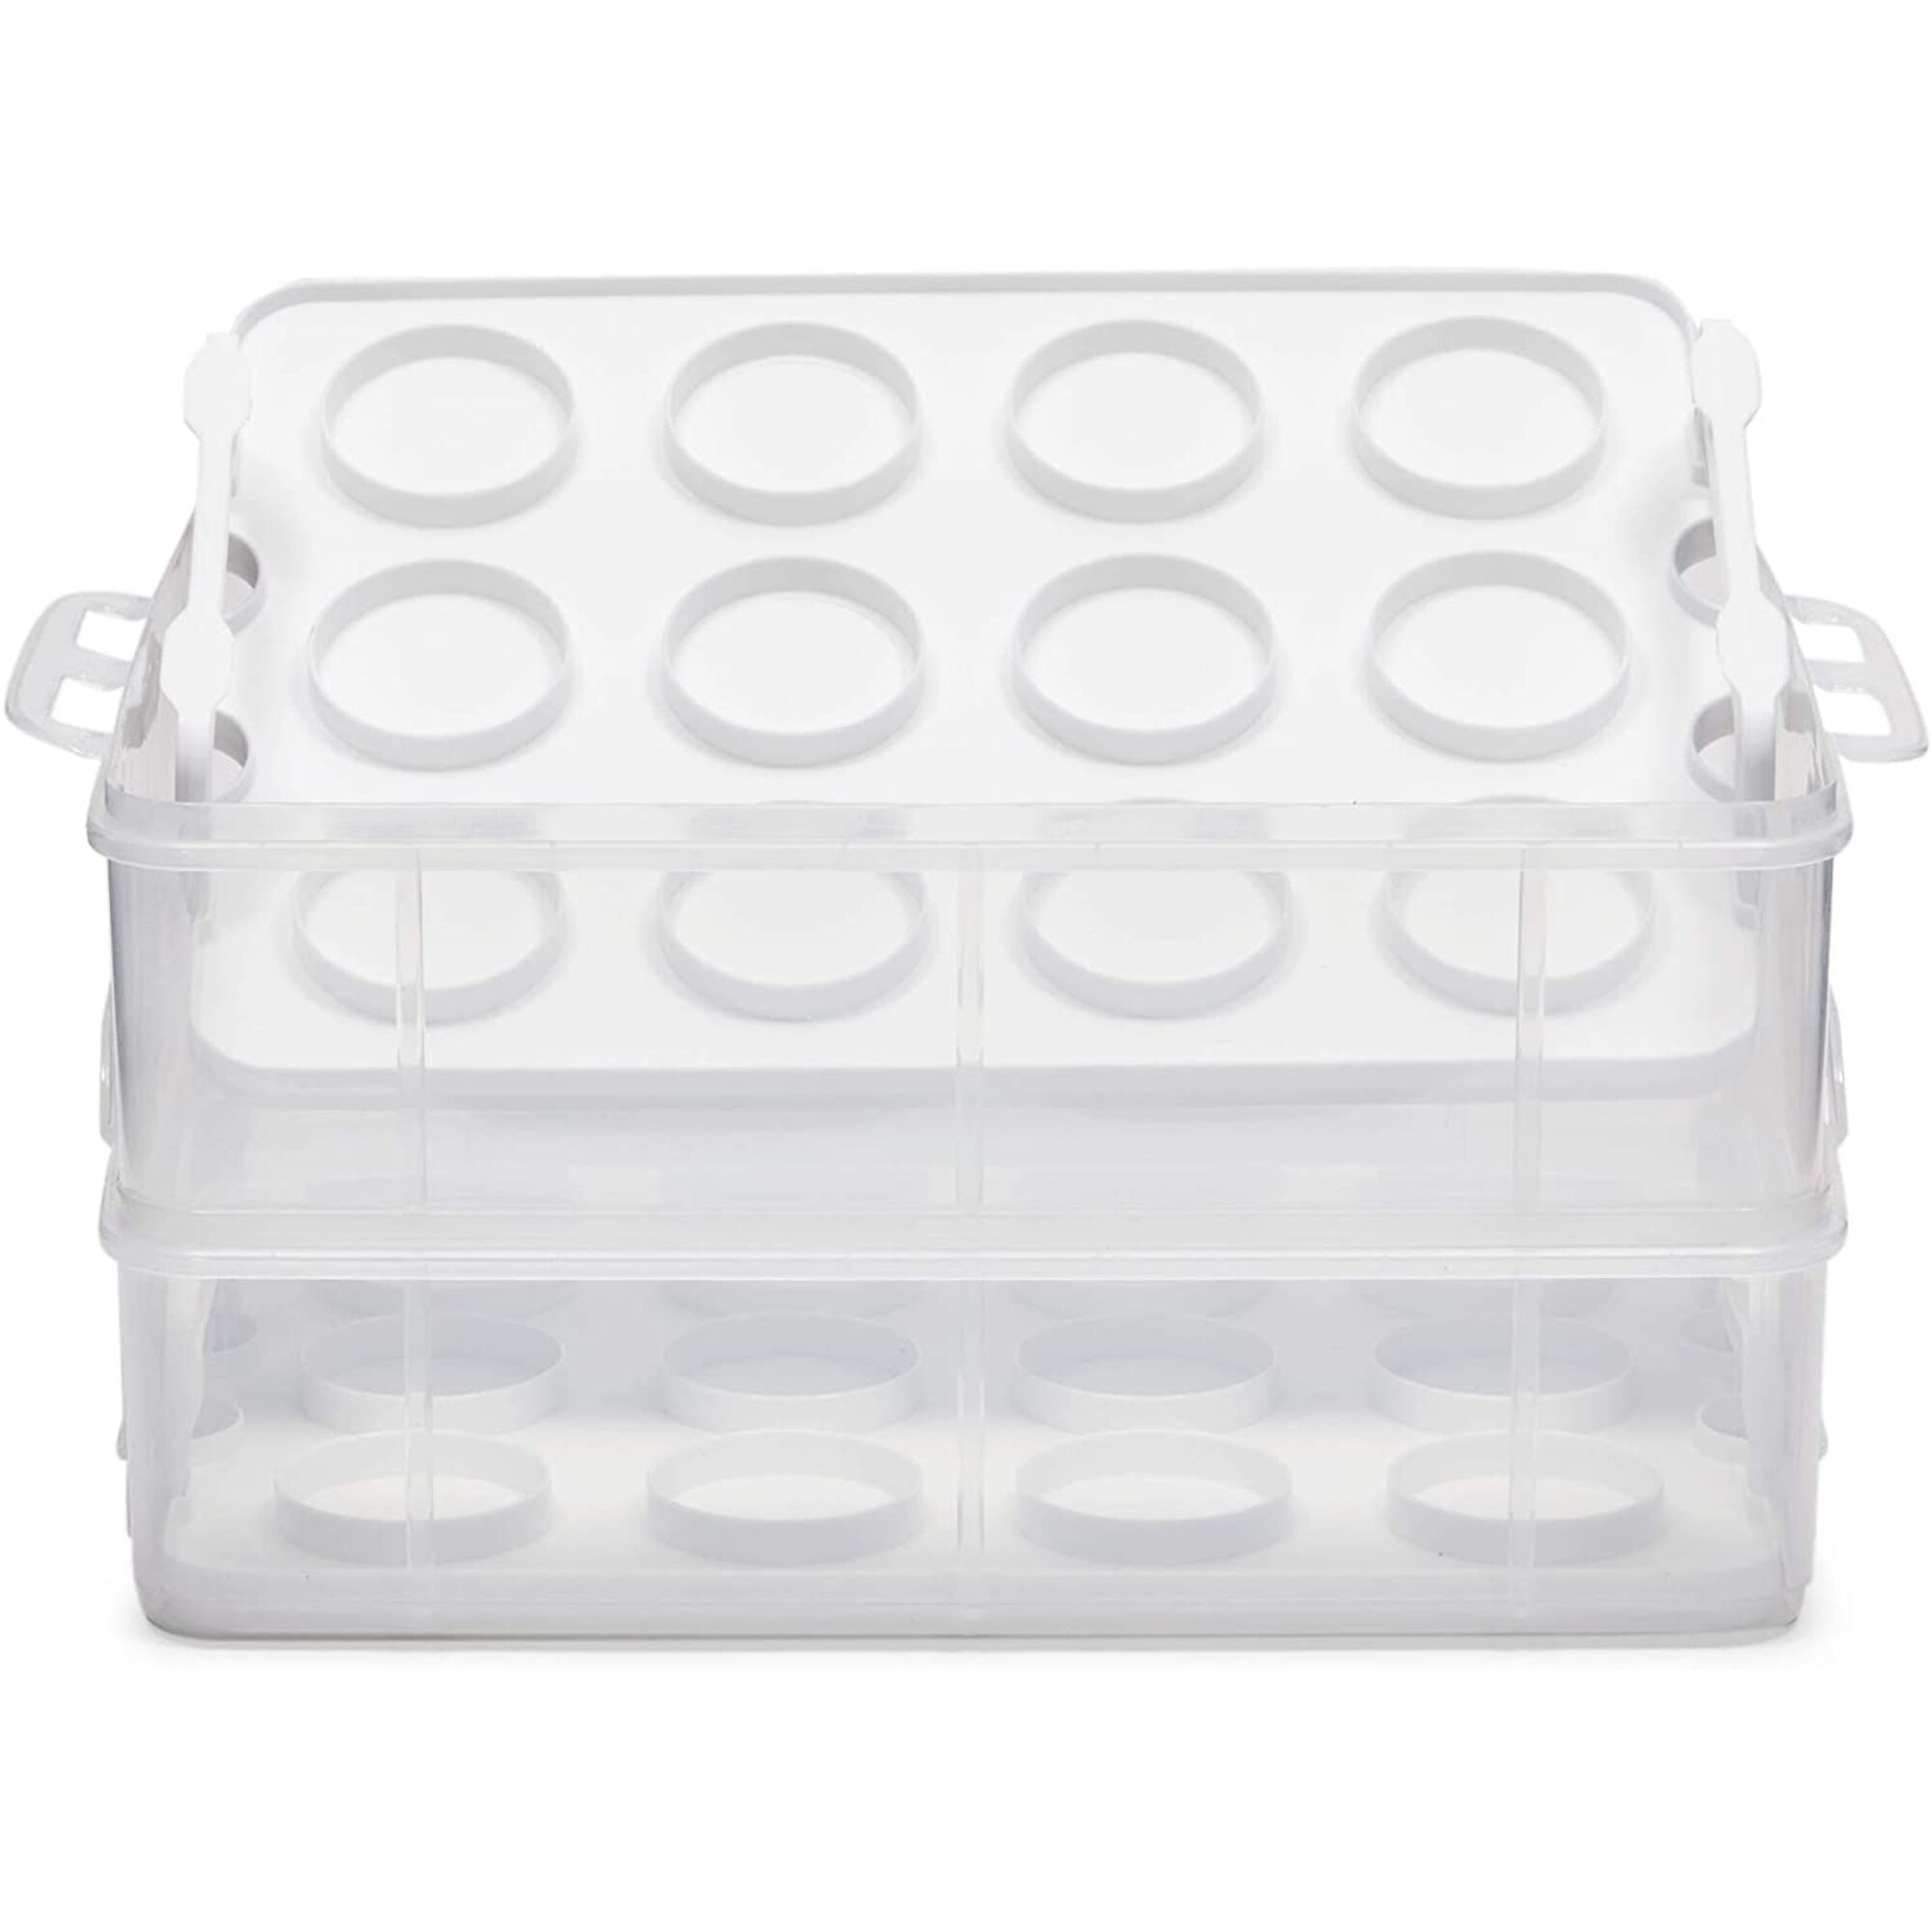 Flexzion Cupcake Carrier, Cupcake Holder for 24 Cupcakes, Portable and  Reusable Rectangular Cake Carrier with Lid and Handle, 2 Tier Stackable  Layer